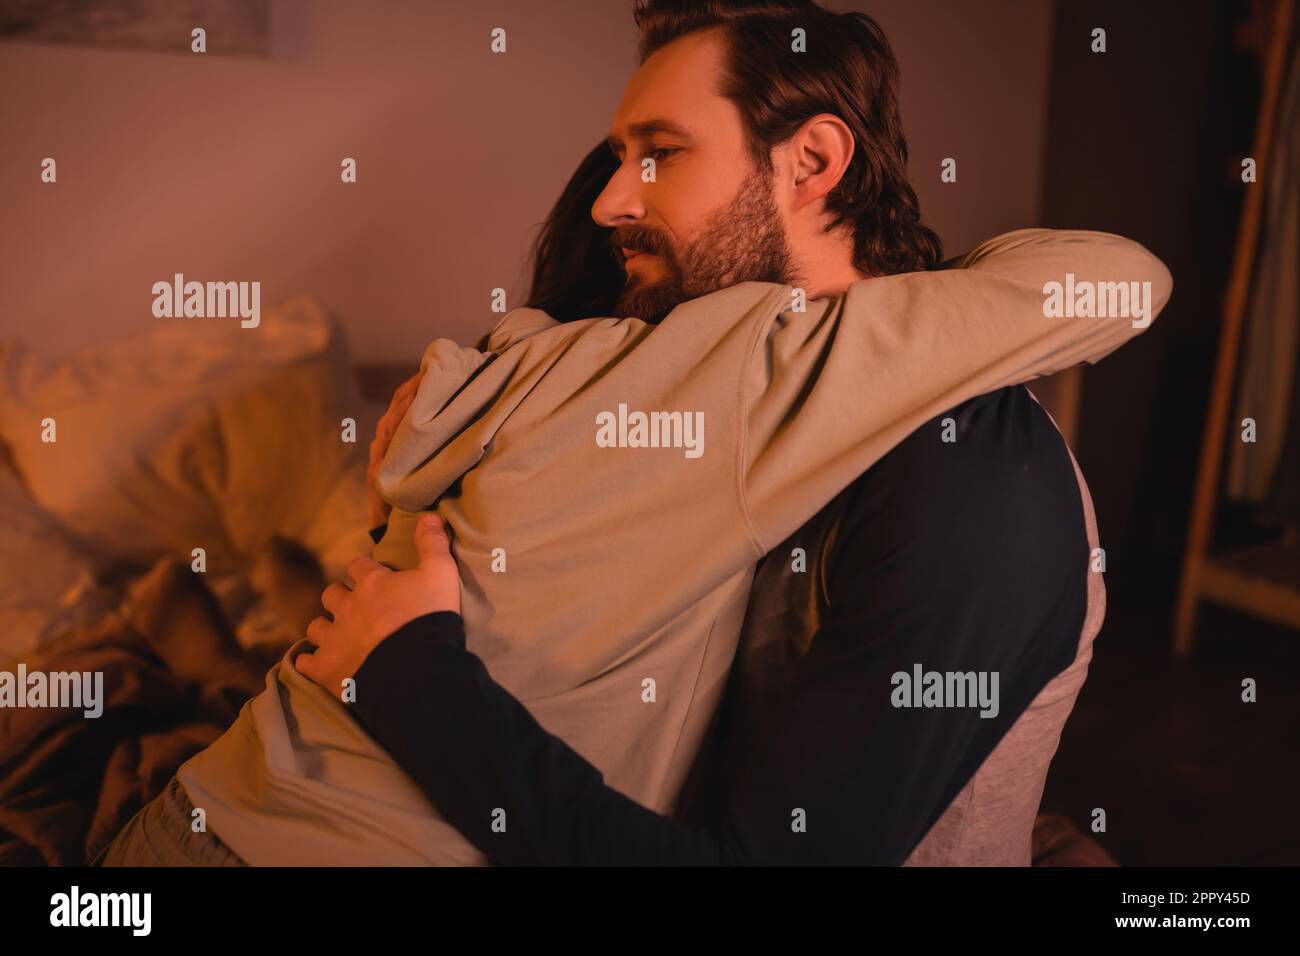 Bearded man hugging and calming down girlfriend in bedroom at night,stock image Stock Photo